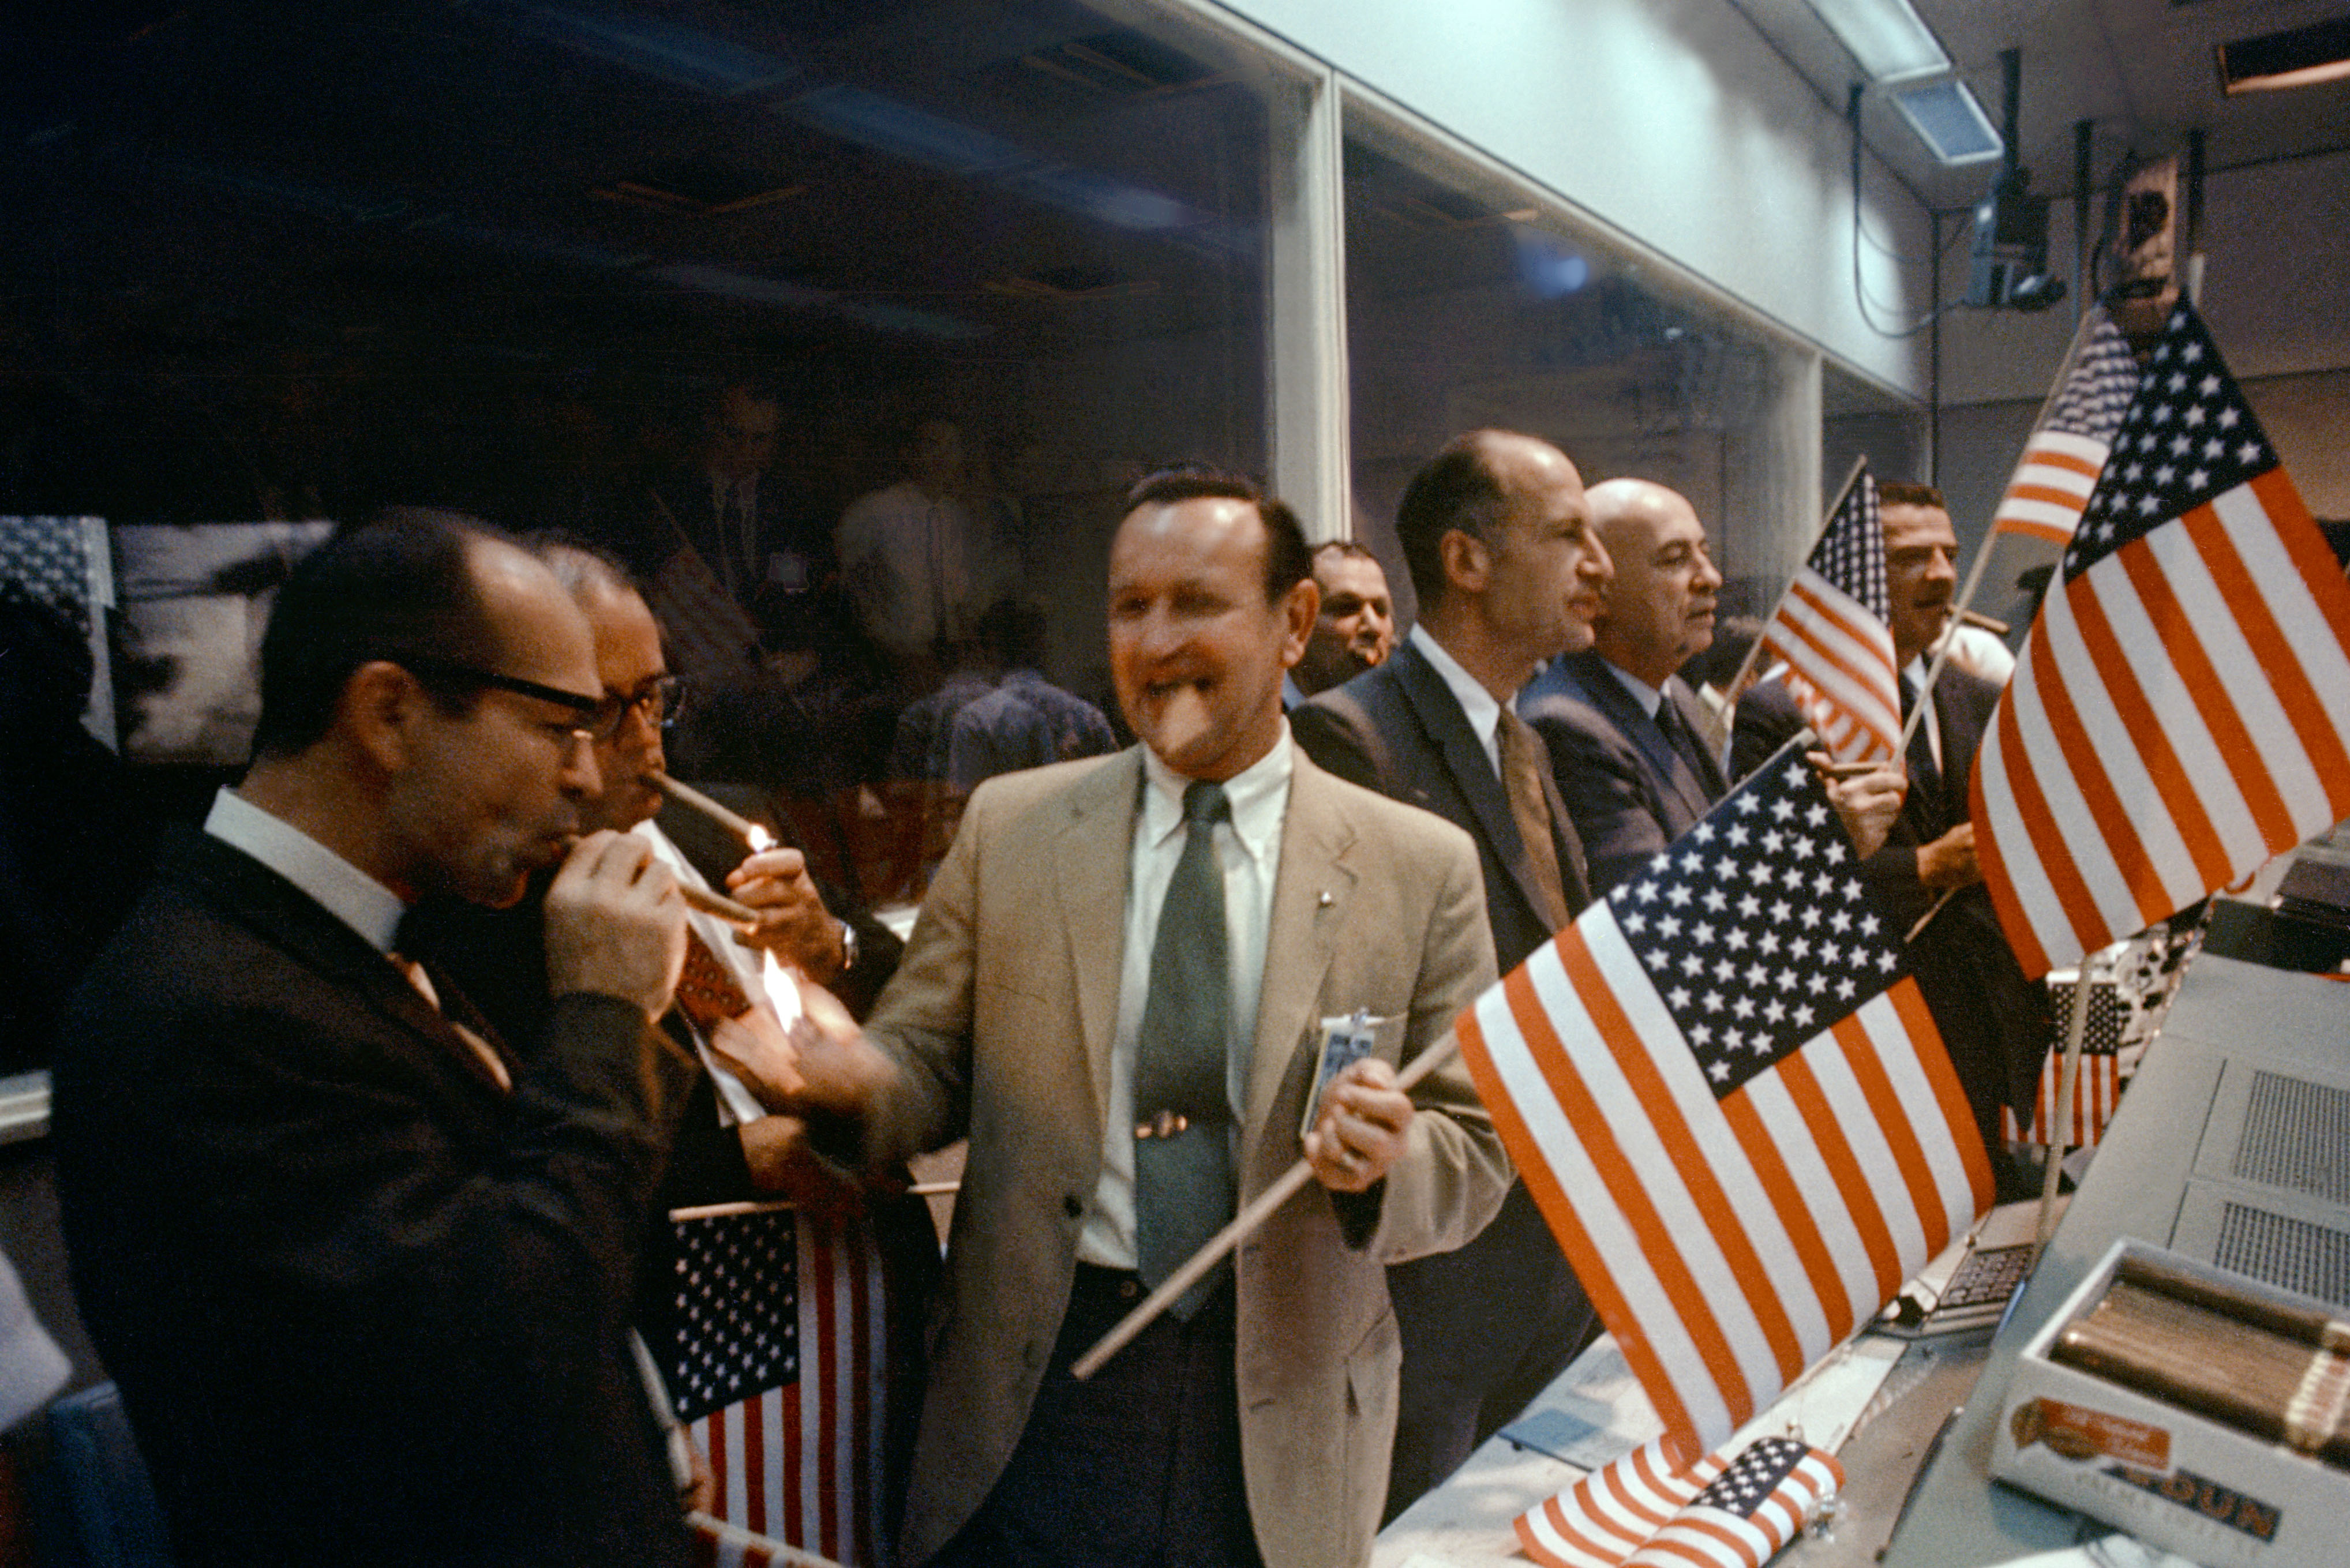 Moon landing: Was it 50 years ago or 500?